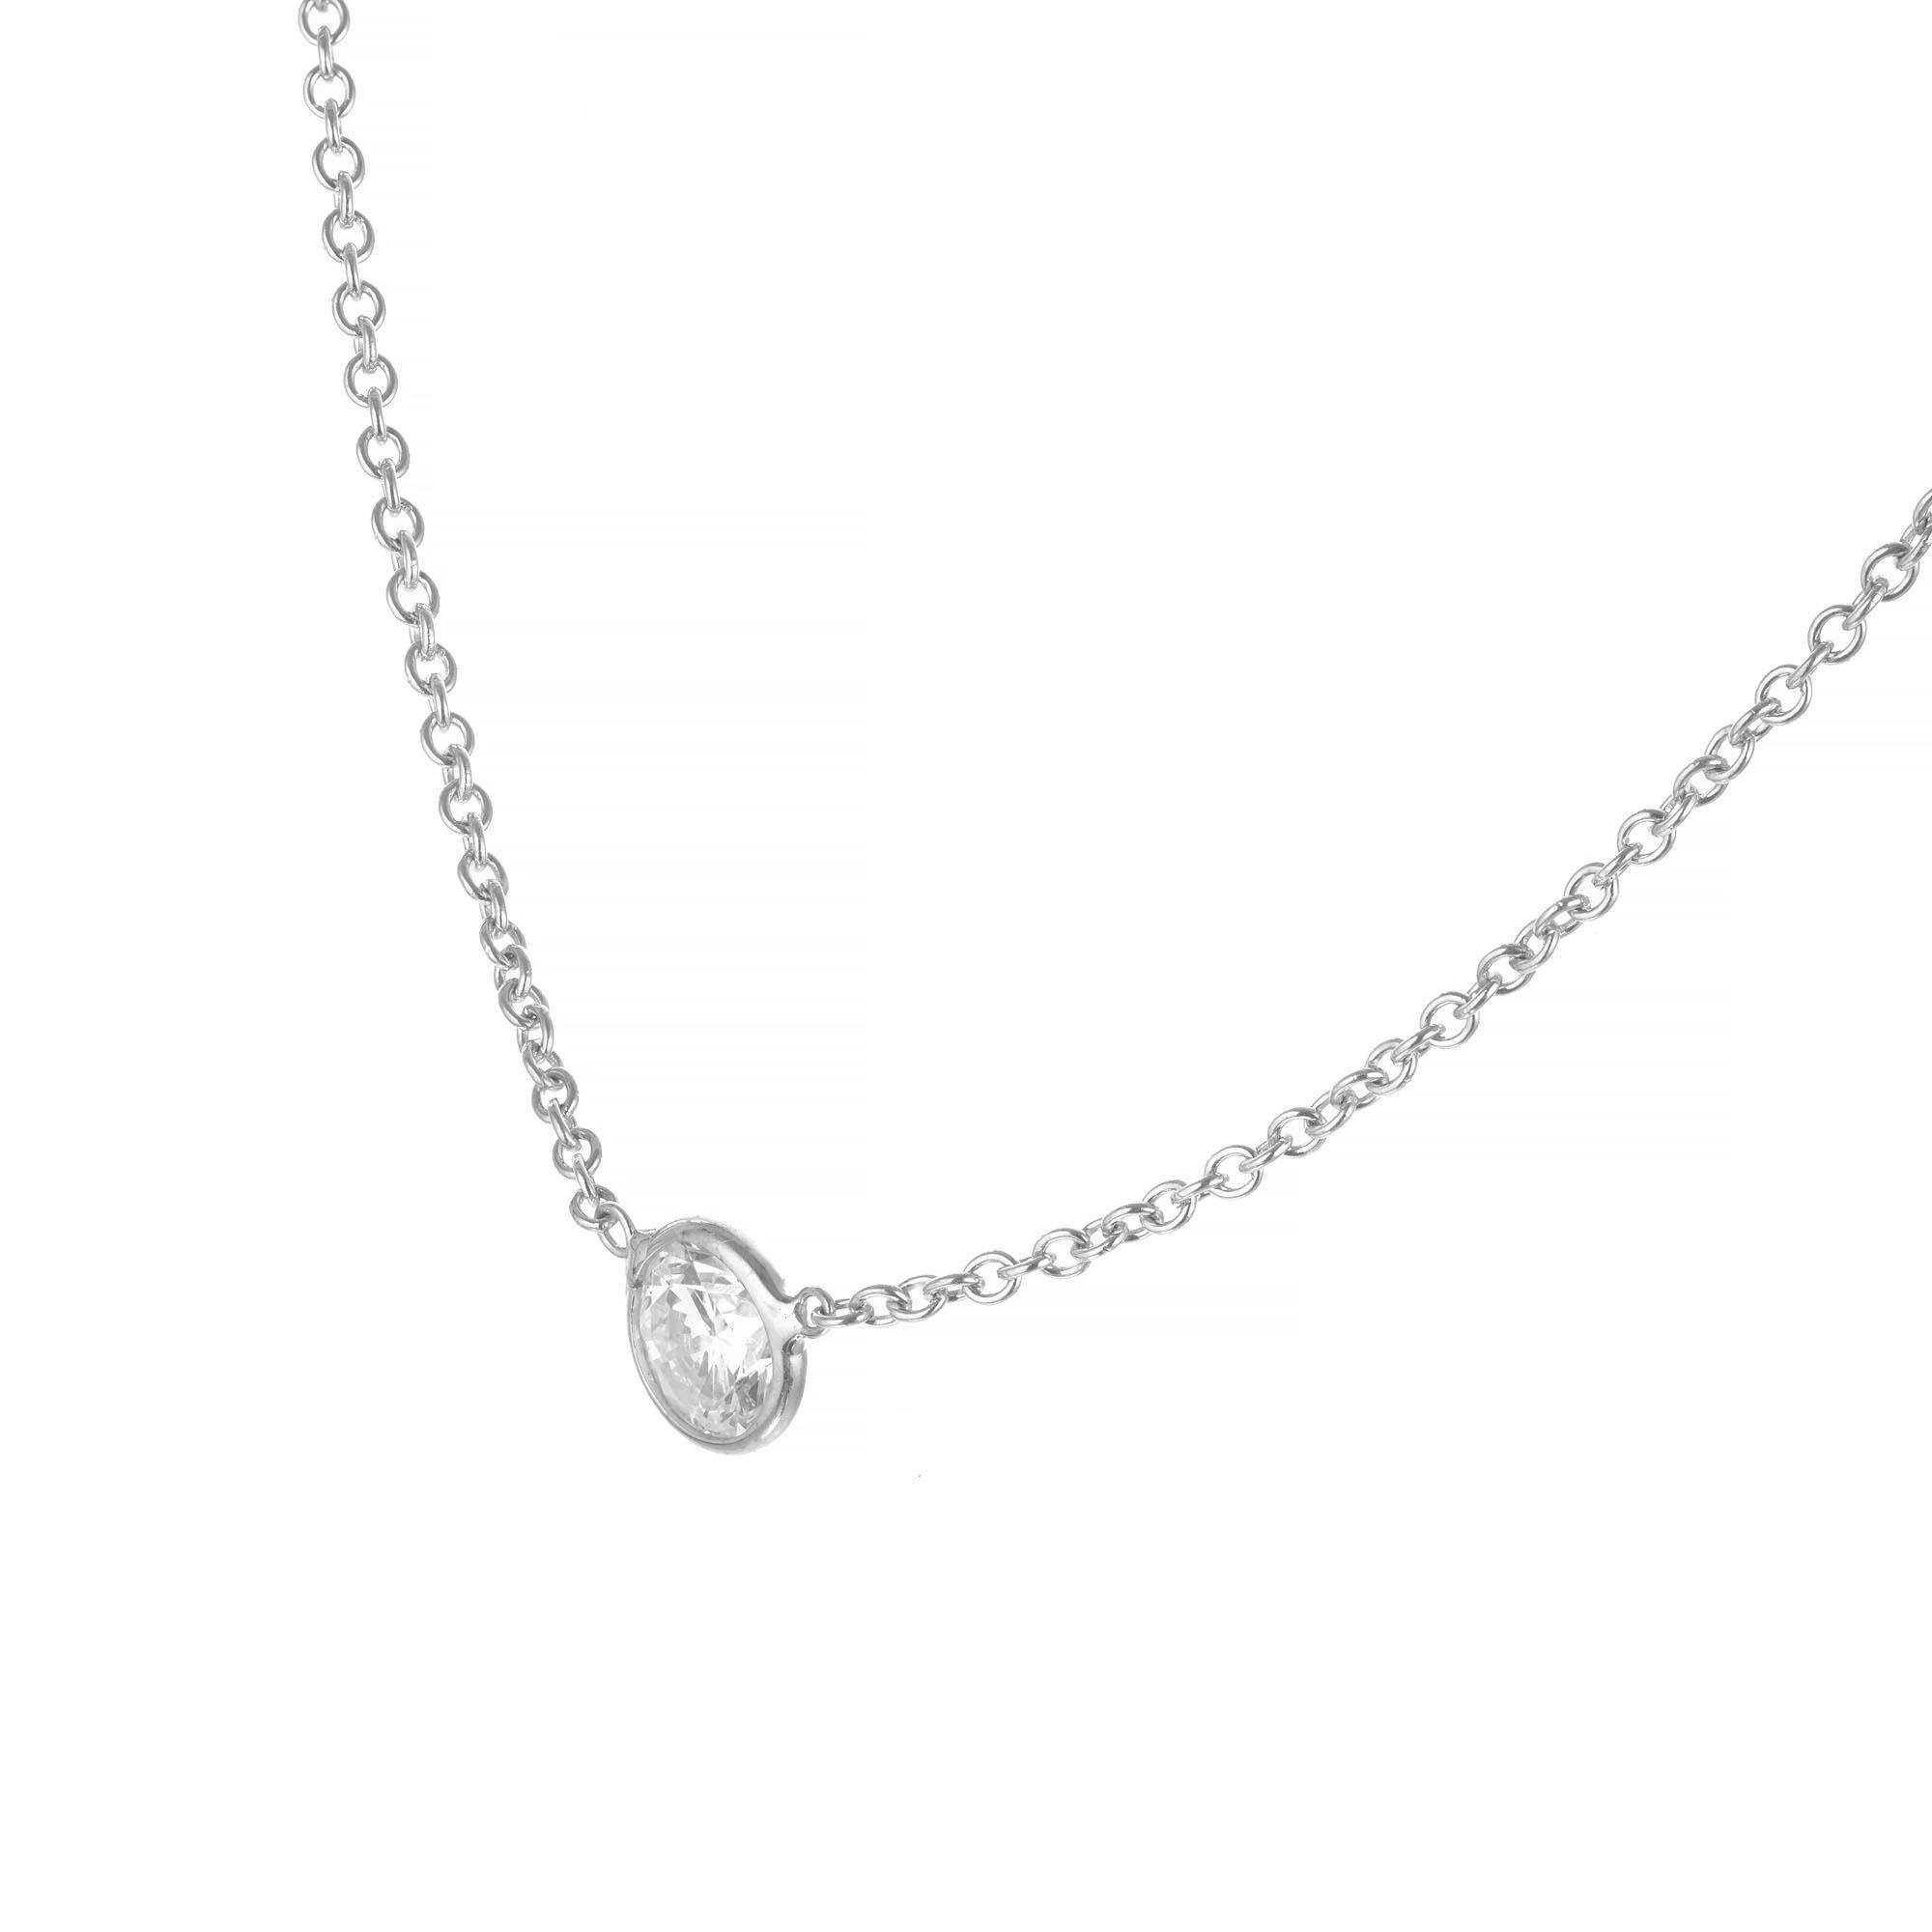 Classic bezel set diamond by the yard style, .50 carat platinum pendant necklace. 16 inch chain. 

1 round brilliant cut diamond, H I approx. .50cts
Platinum
Stamped: PT950
2.7 grams
Top to bottom: 5mm or 3/16 Inch
Width: 5mm or 3/16 Inch
Depth or